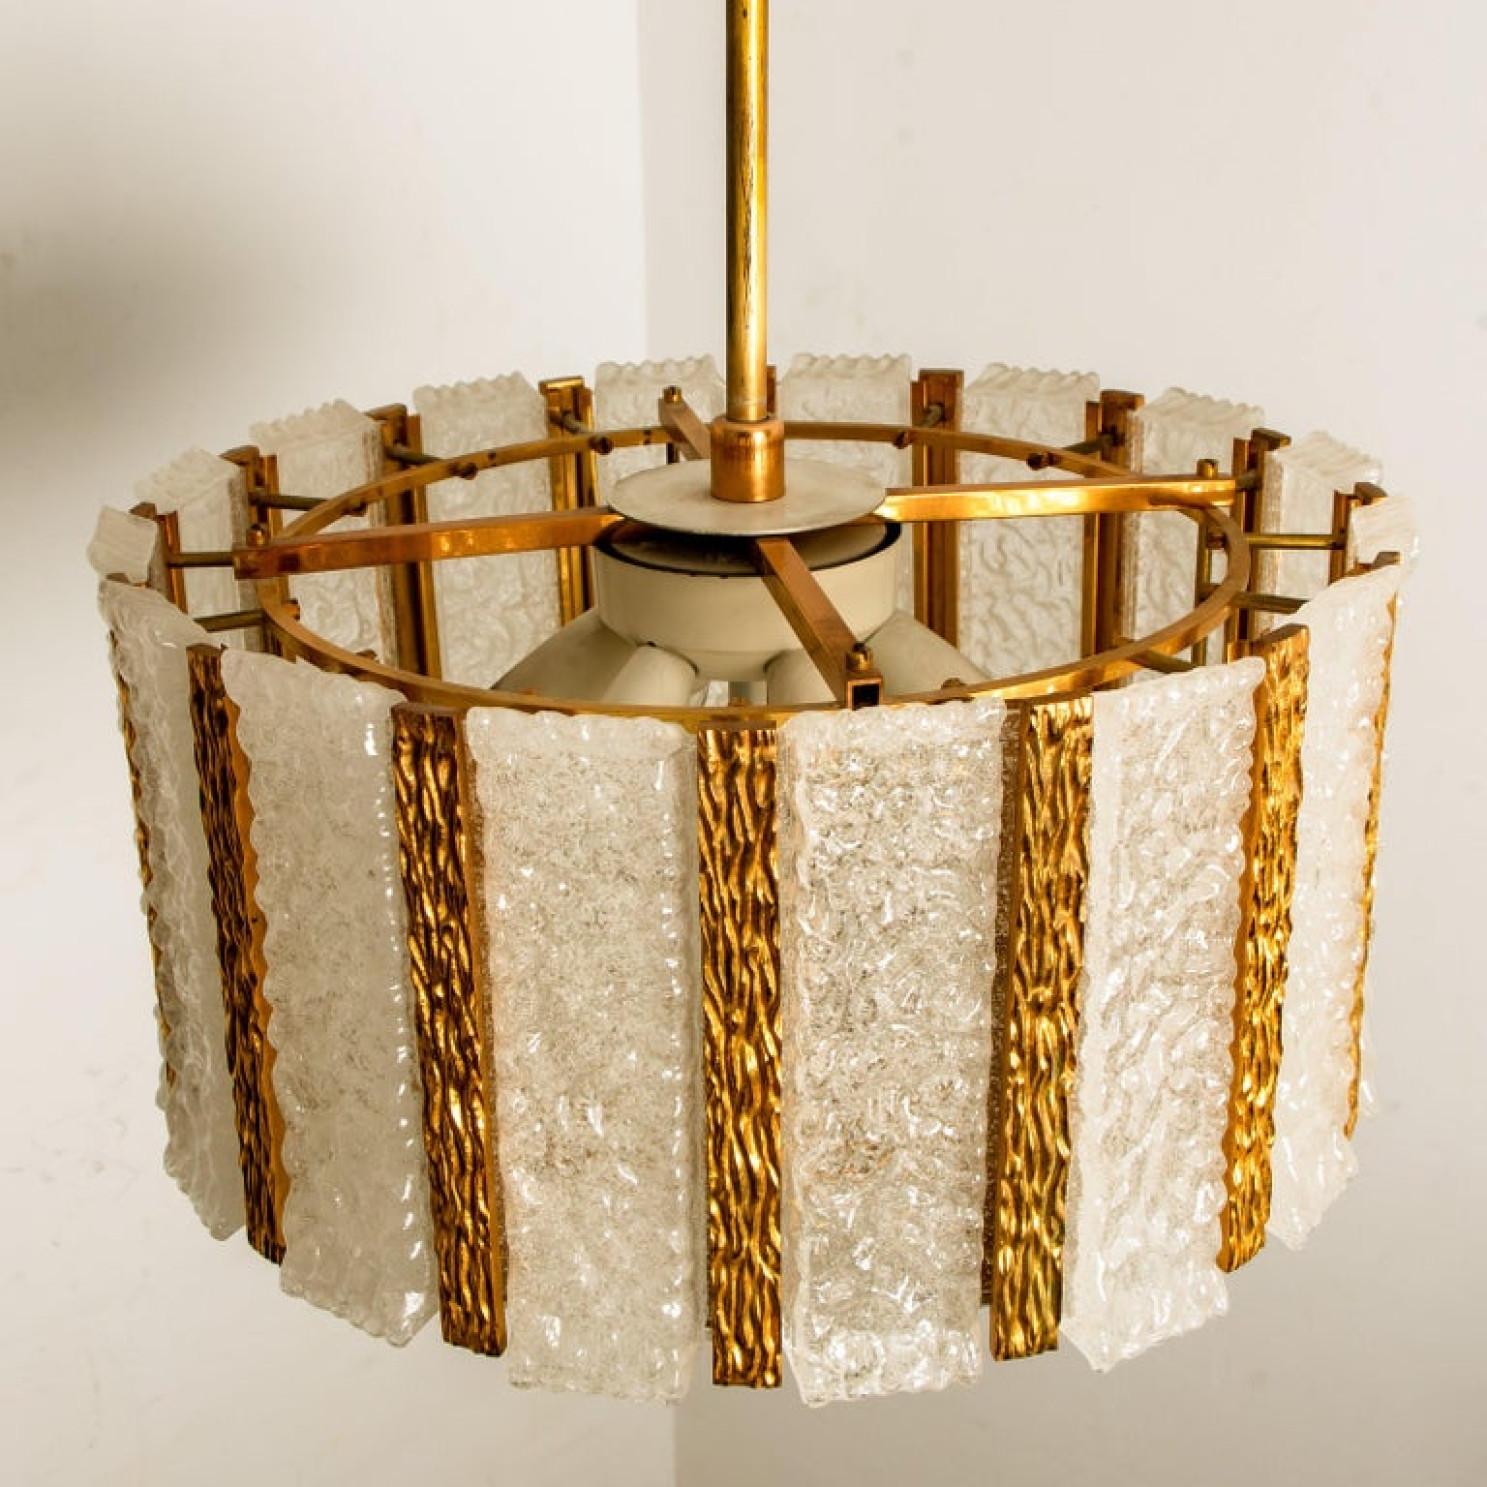 Pair of Gold-Plated Bronze Drum Light Fixtures, 1960s, Austria For Sale 6